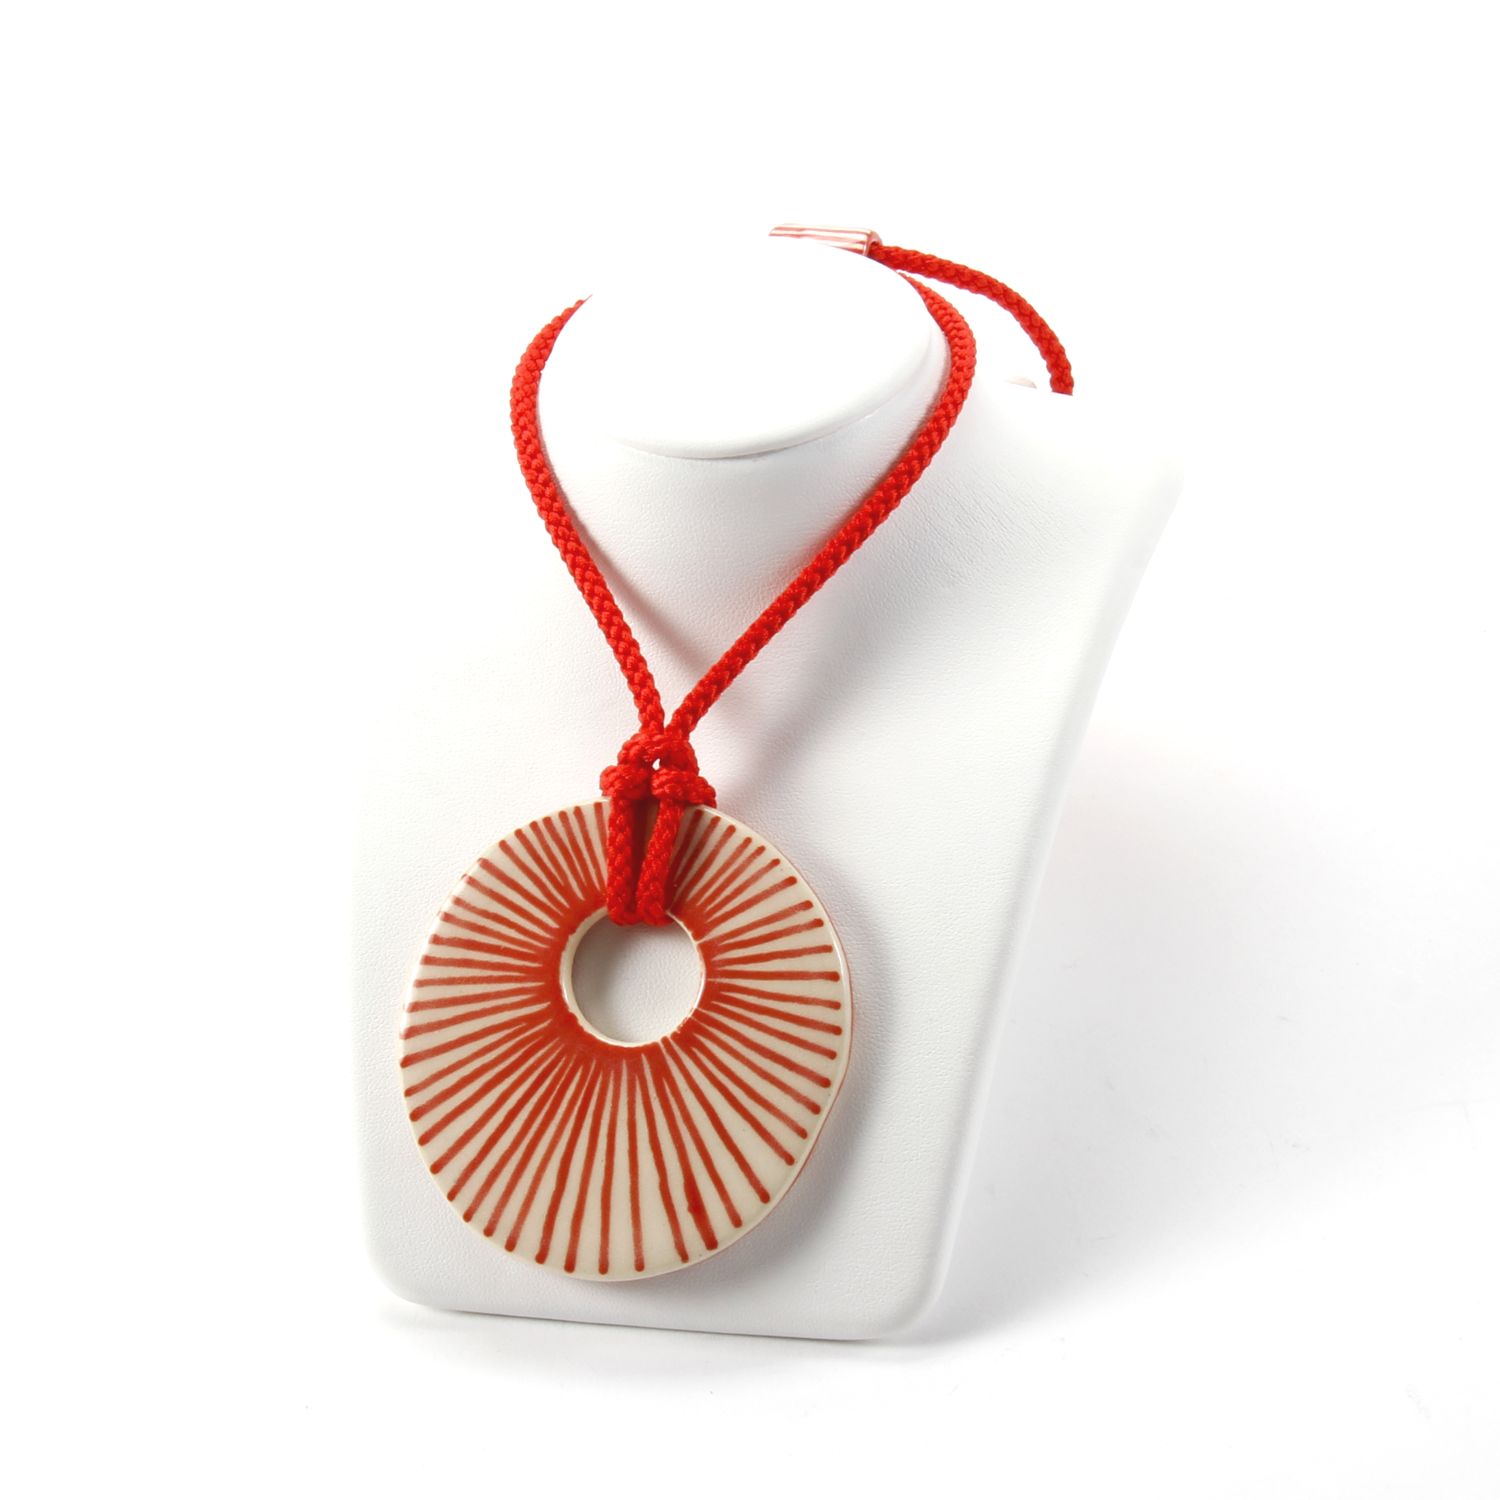 Here and Here: Pendant with Lines Product Image 1 of 3